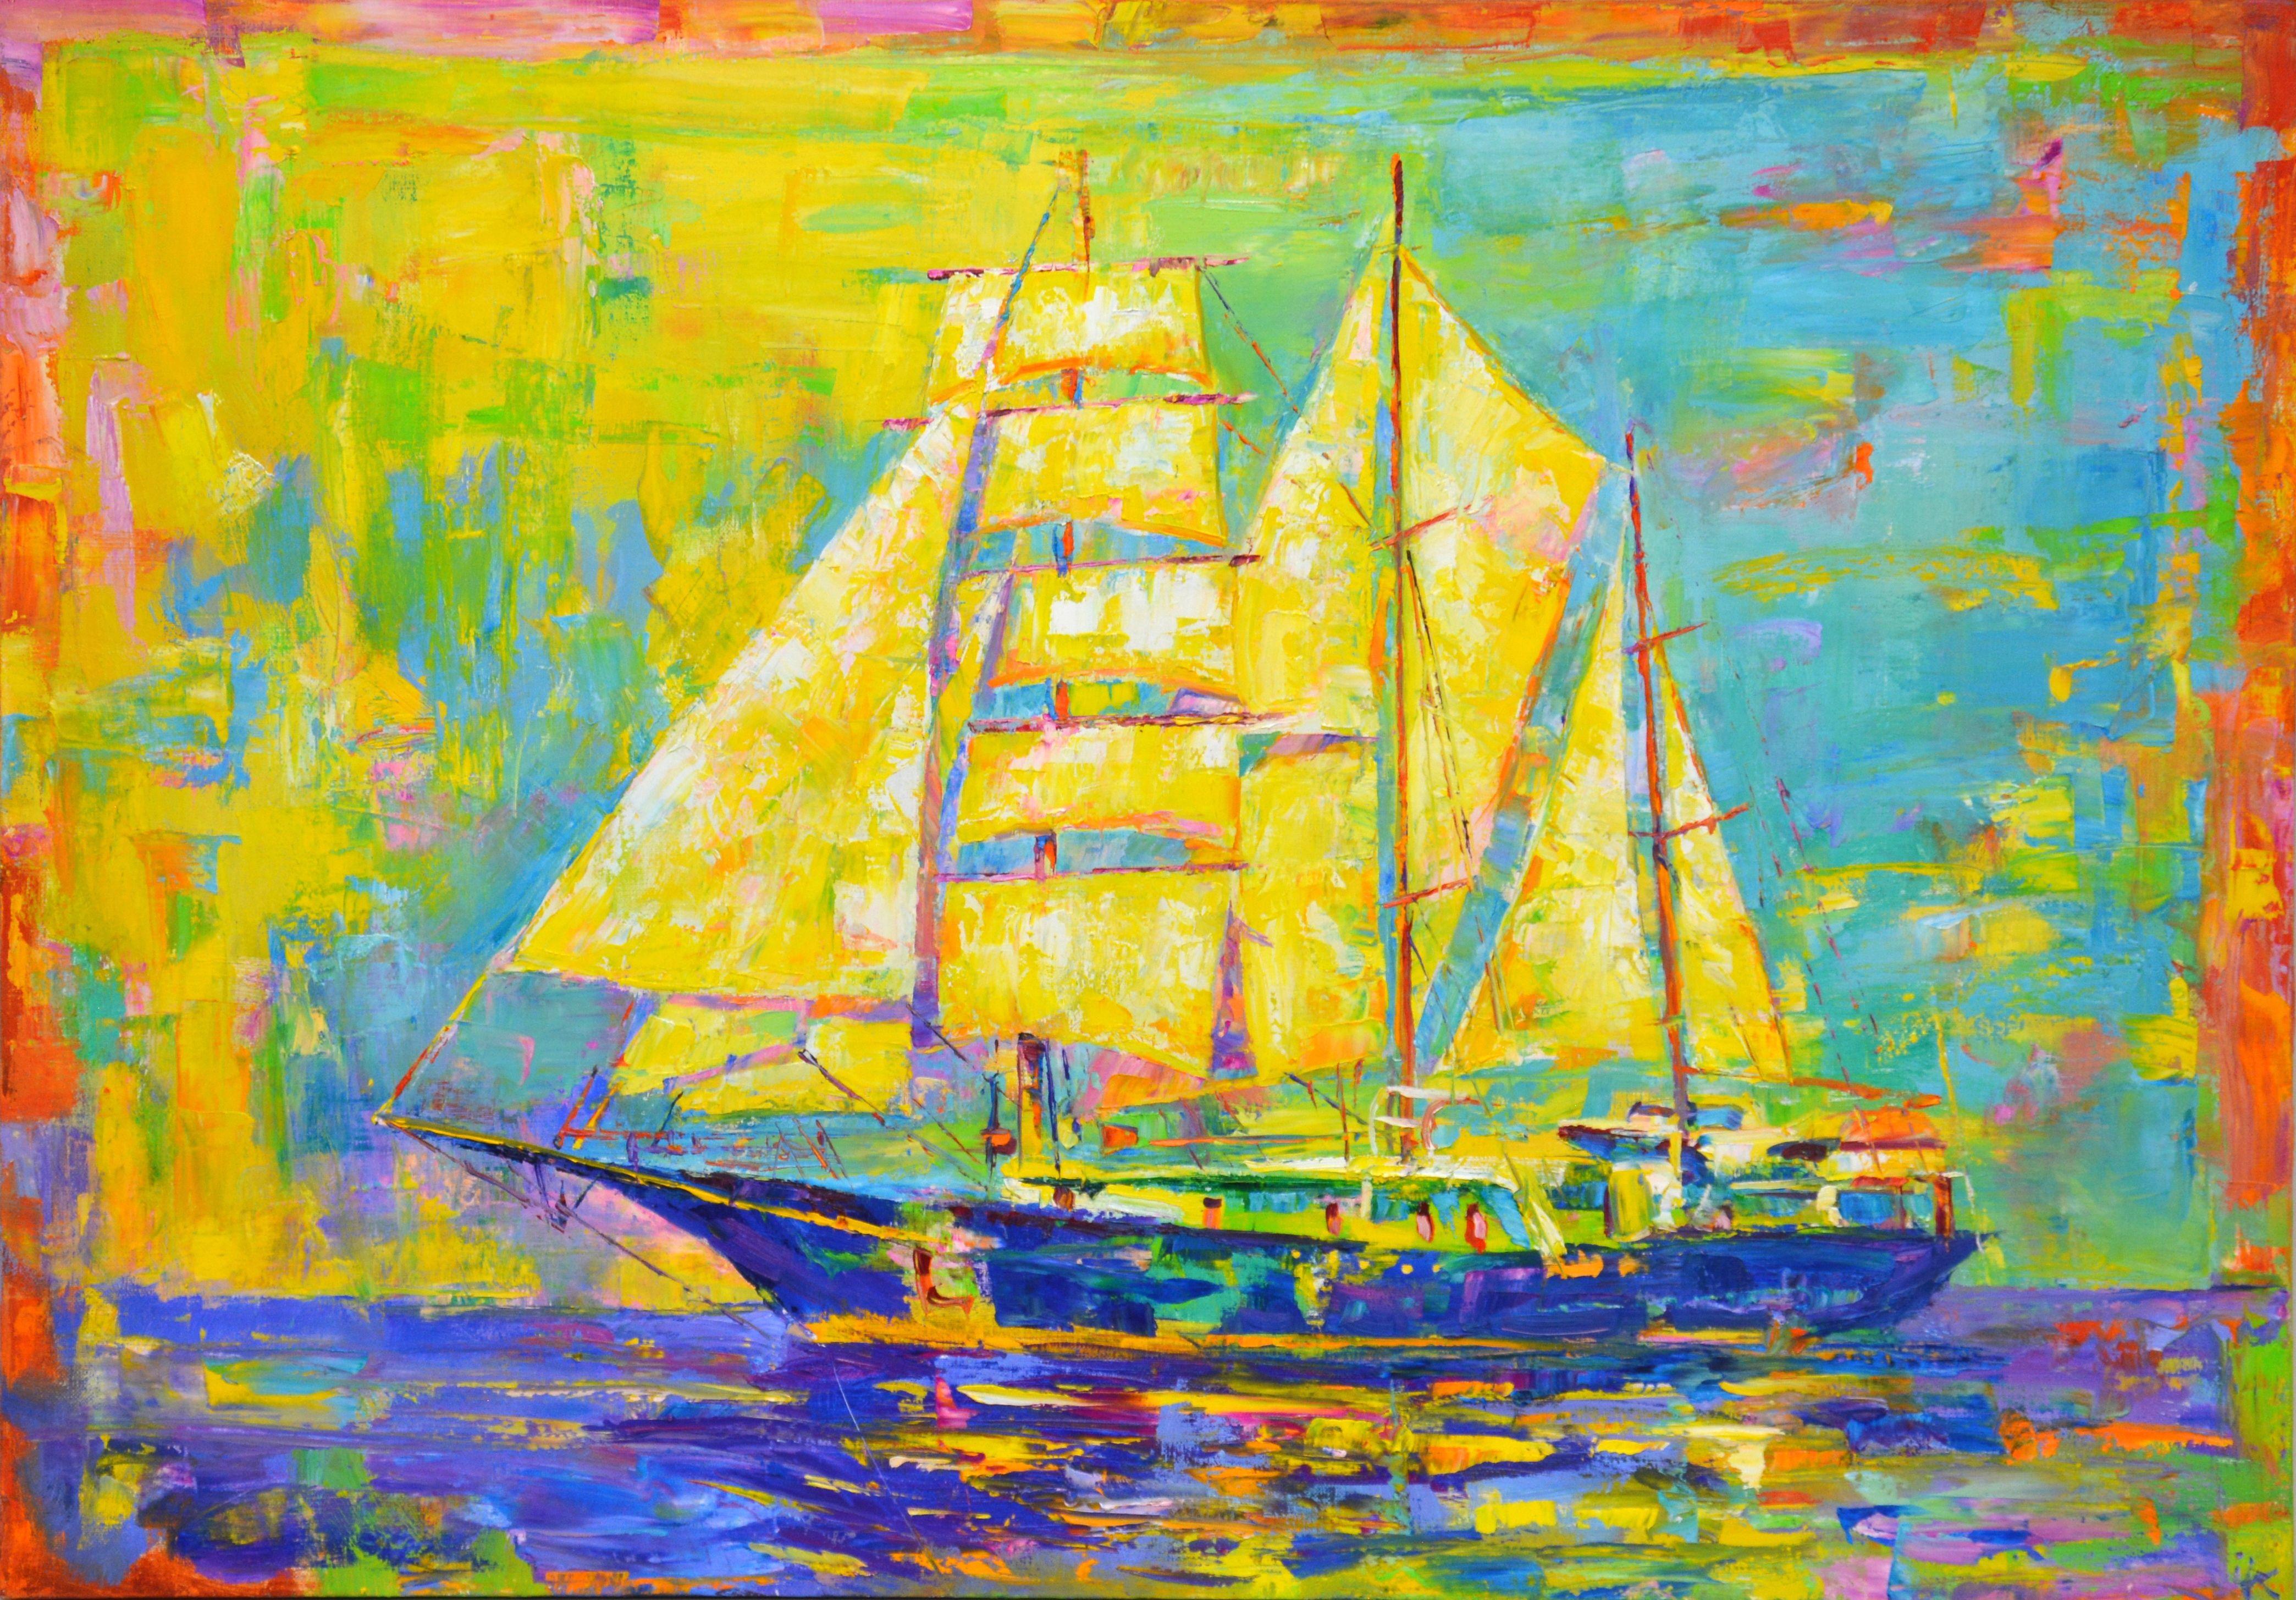 Painting Ship on an abstract yellow, blue background. Expressionism. Work of a knife with a palette knife. Bright colors, texture, lines allow to convey the dynamics of life. The work has good spatial quality, and children like the colors. Used high